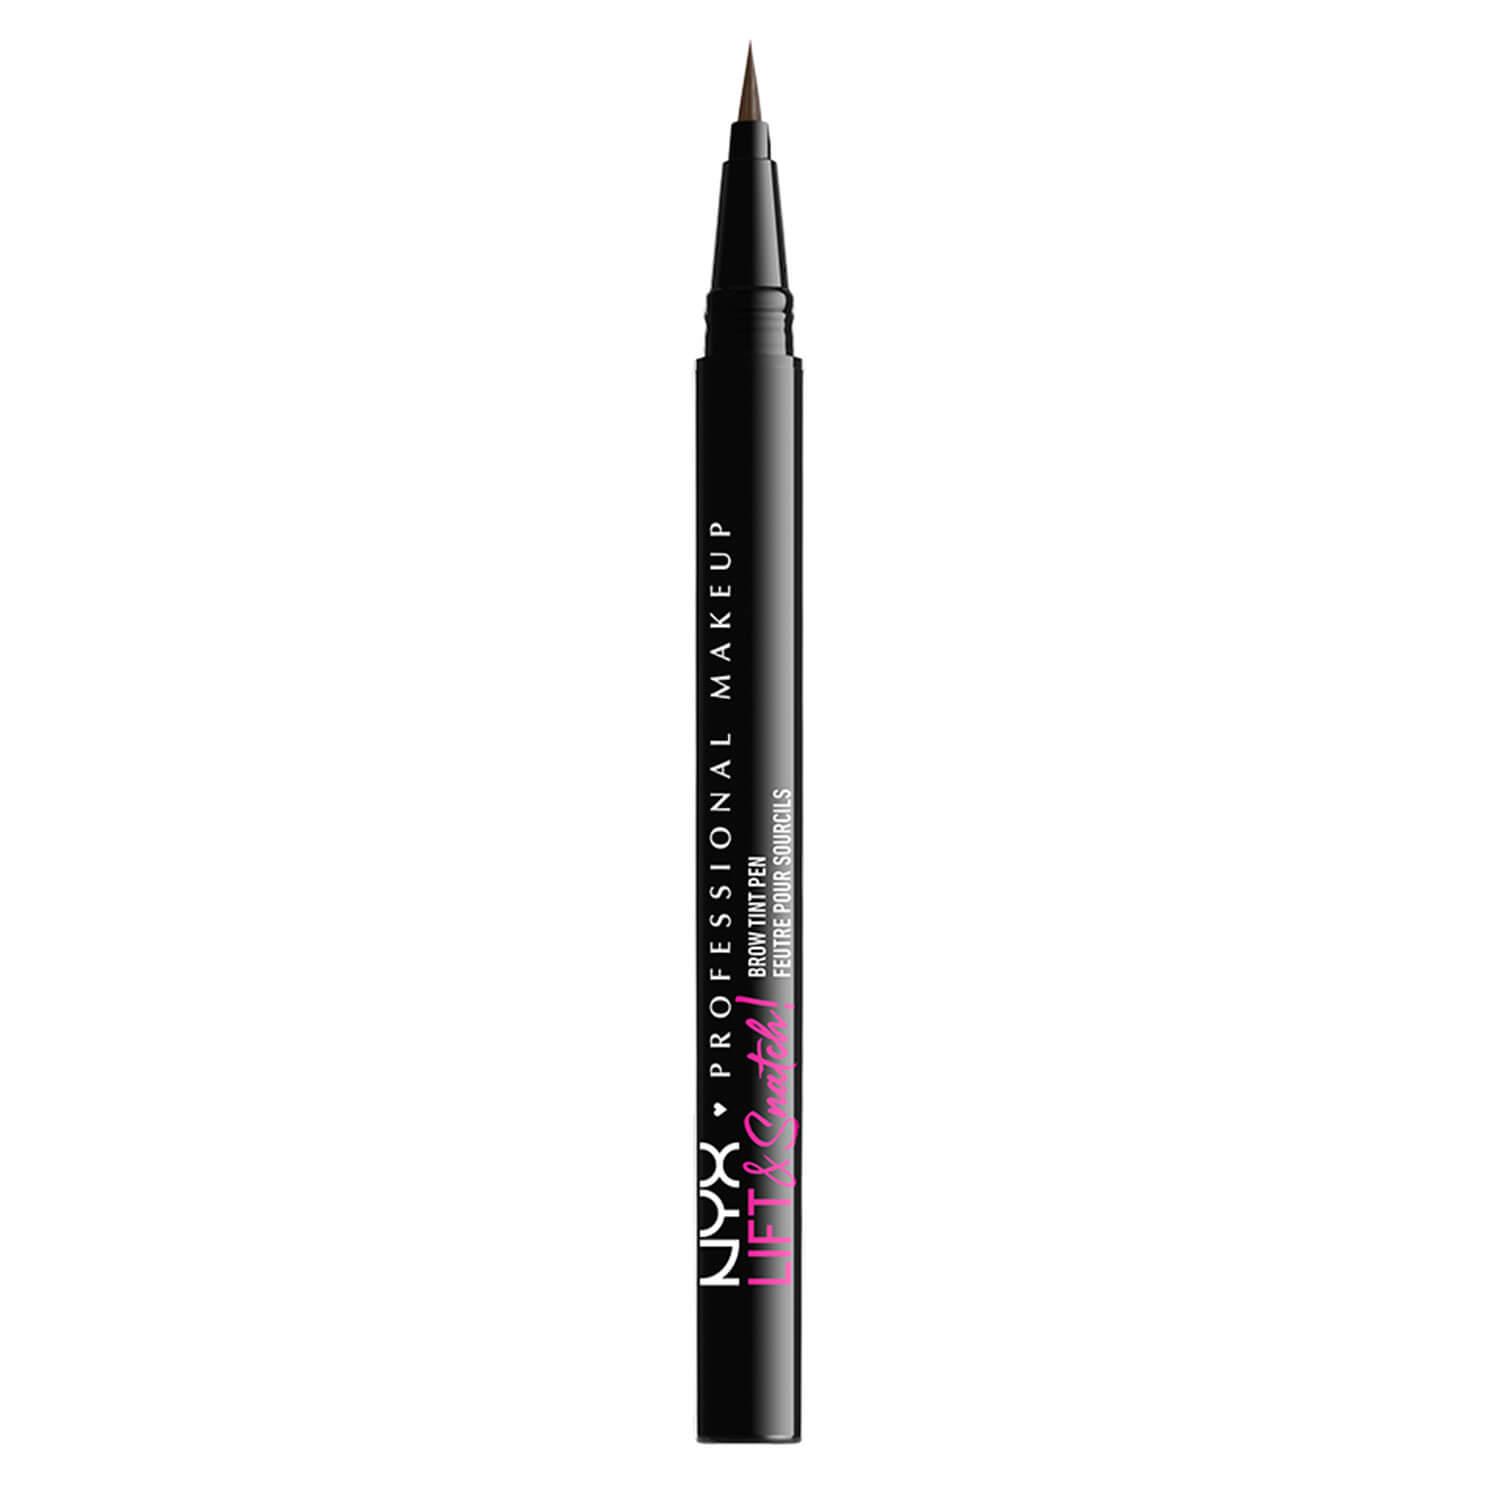 NYX Brows - Lift & Snatch! Brow Tint Pen Ash Brown 06